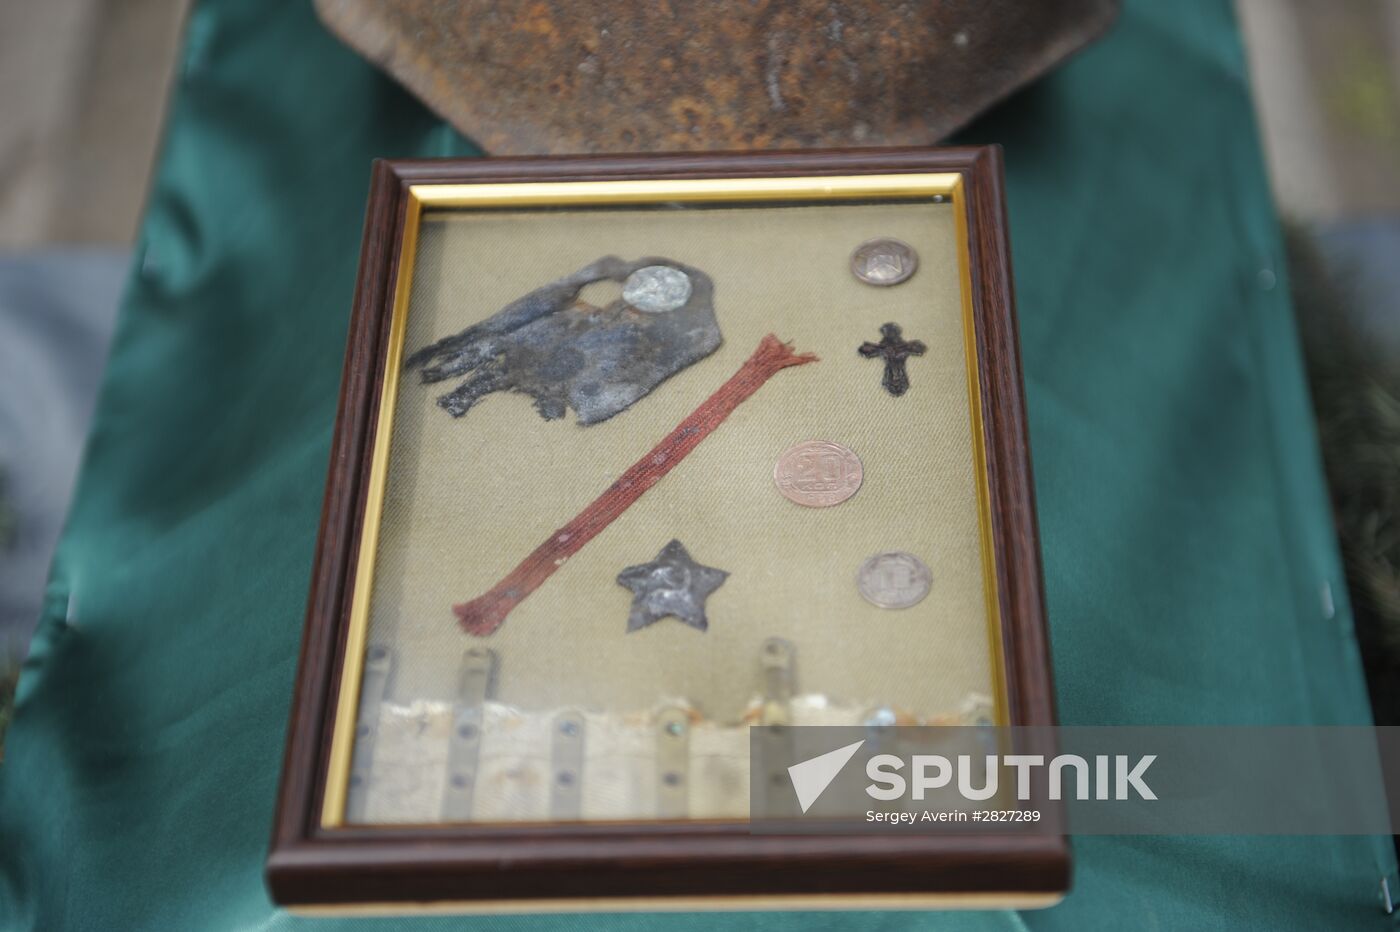 Relics of a serviceman killed in action in 1943 during battle for Slavyansk transferred to Russia